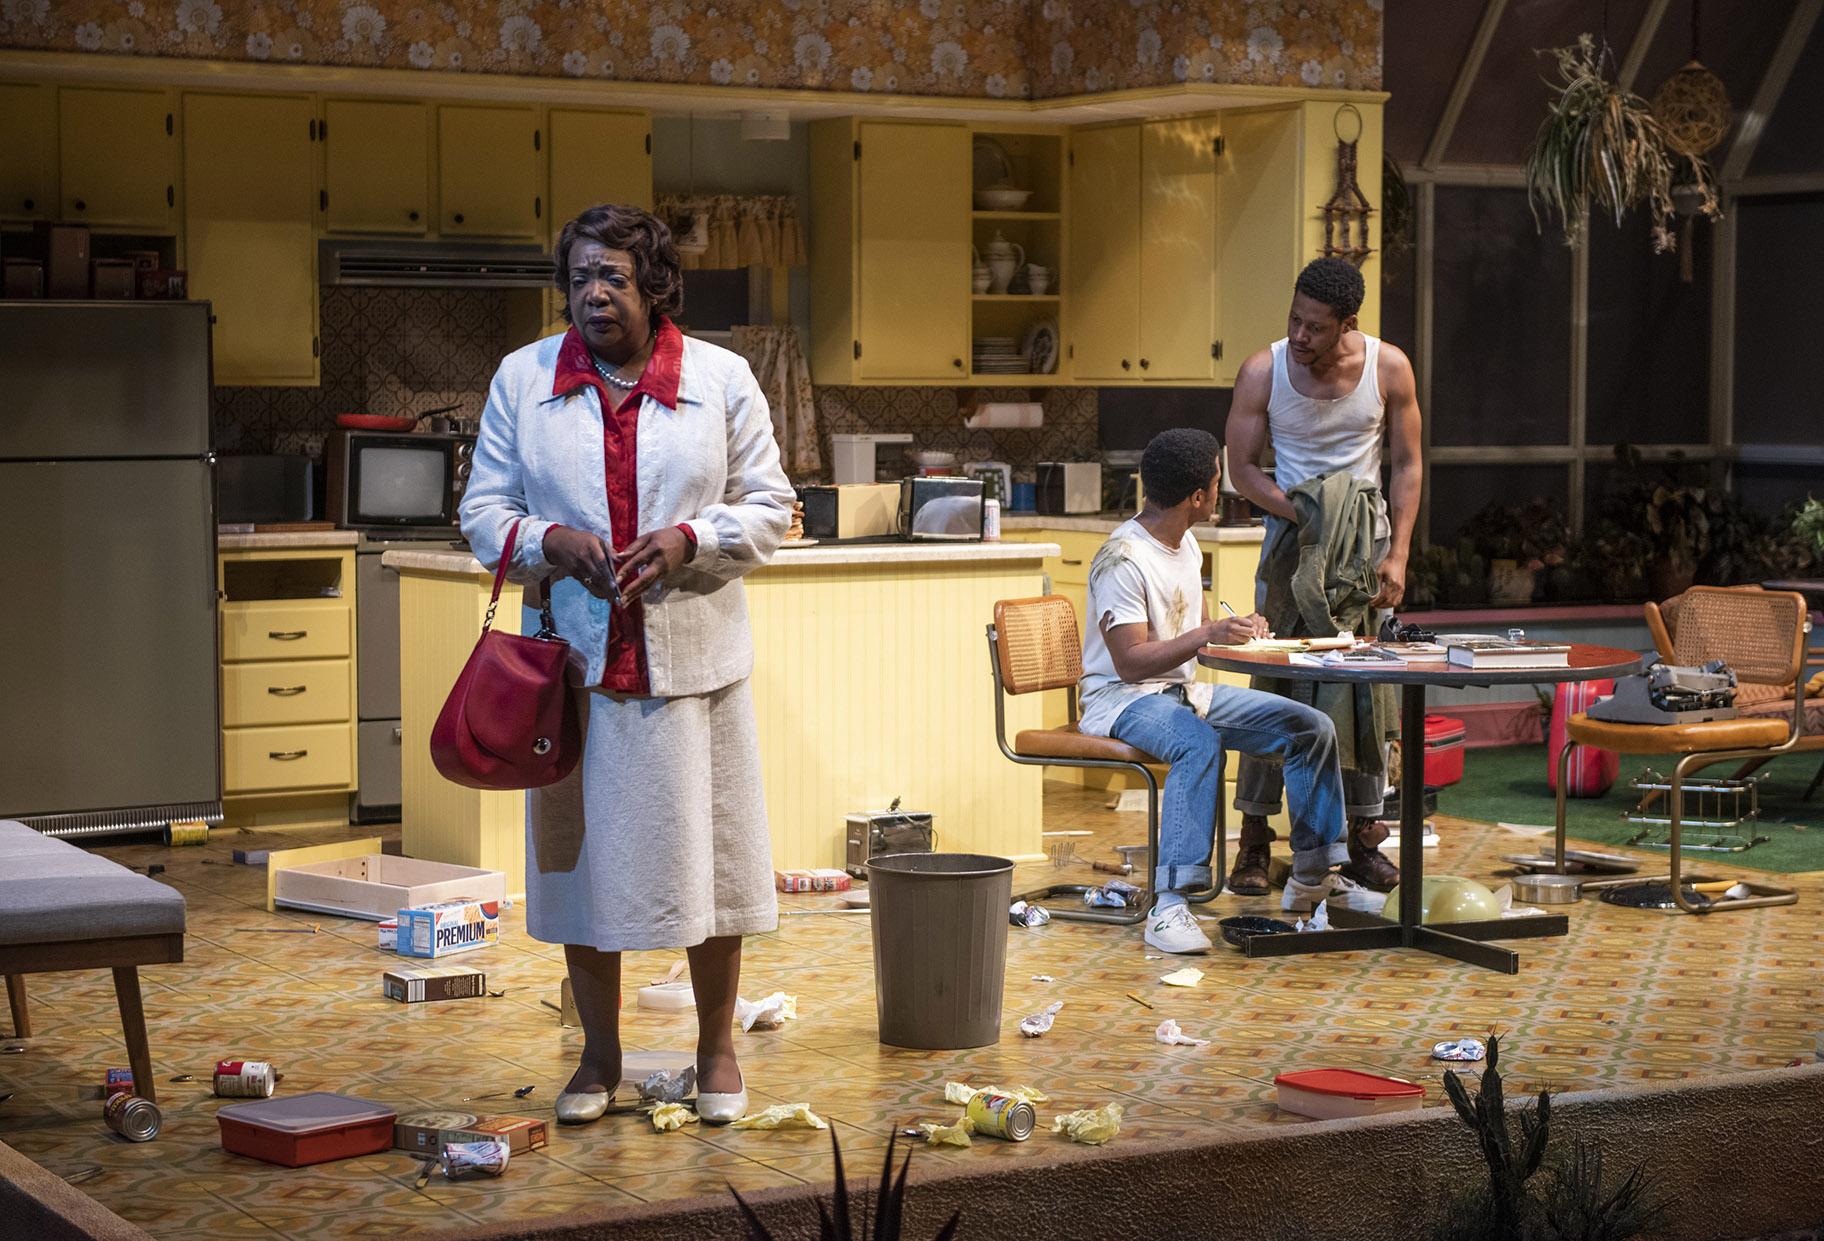 Jacqueline Williams with Jon Michael Hill (center) and Namir Smallwood in “True West.” (Photo by Michael Brosilow)